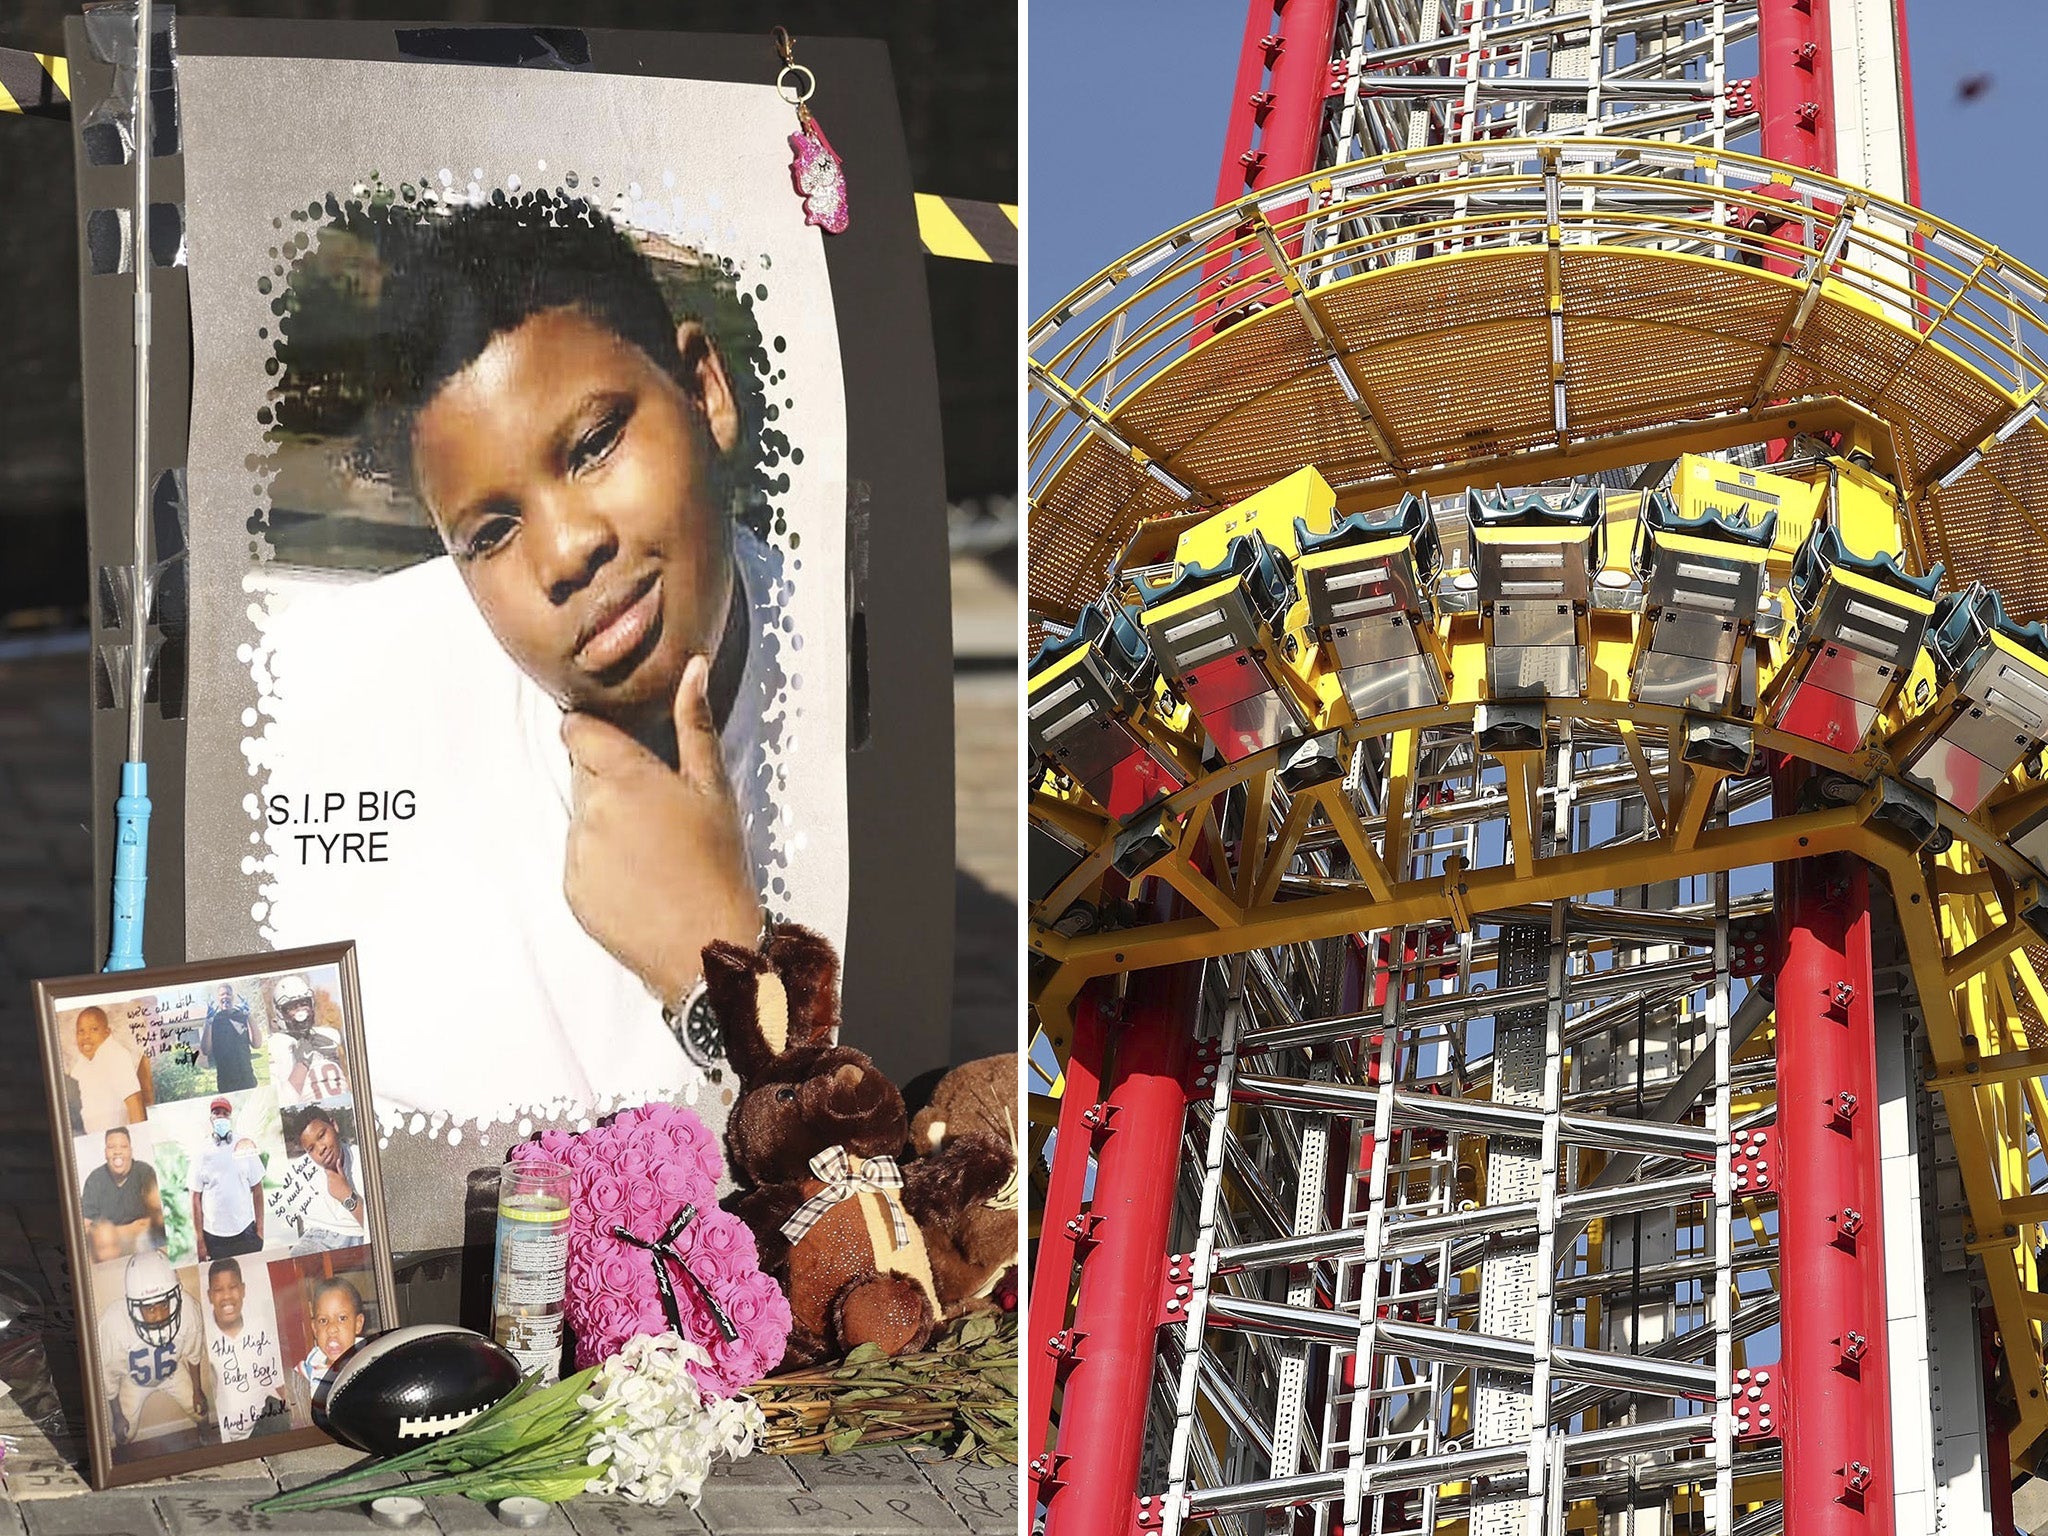 Tyre Sampson, 14, was killed when he fell from The Orlando Free Fall drop tower in ICON Park in Orlando